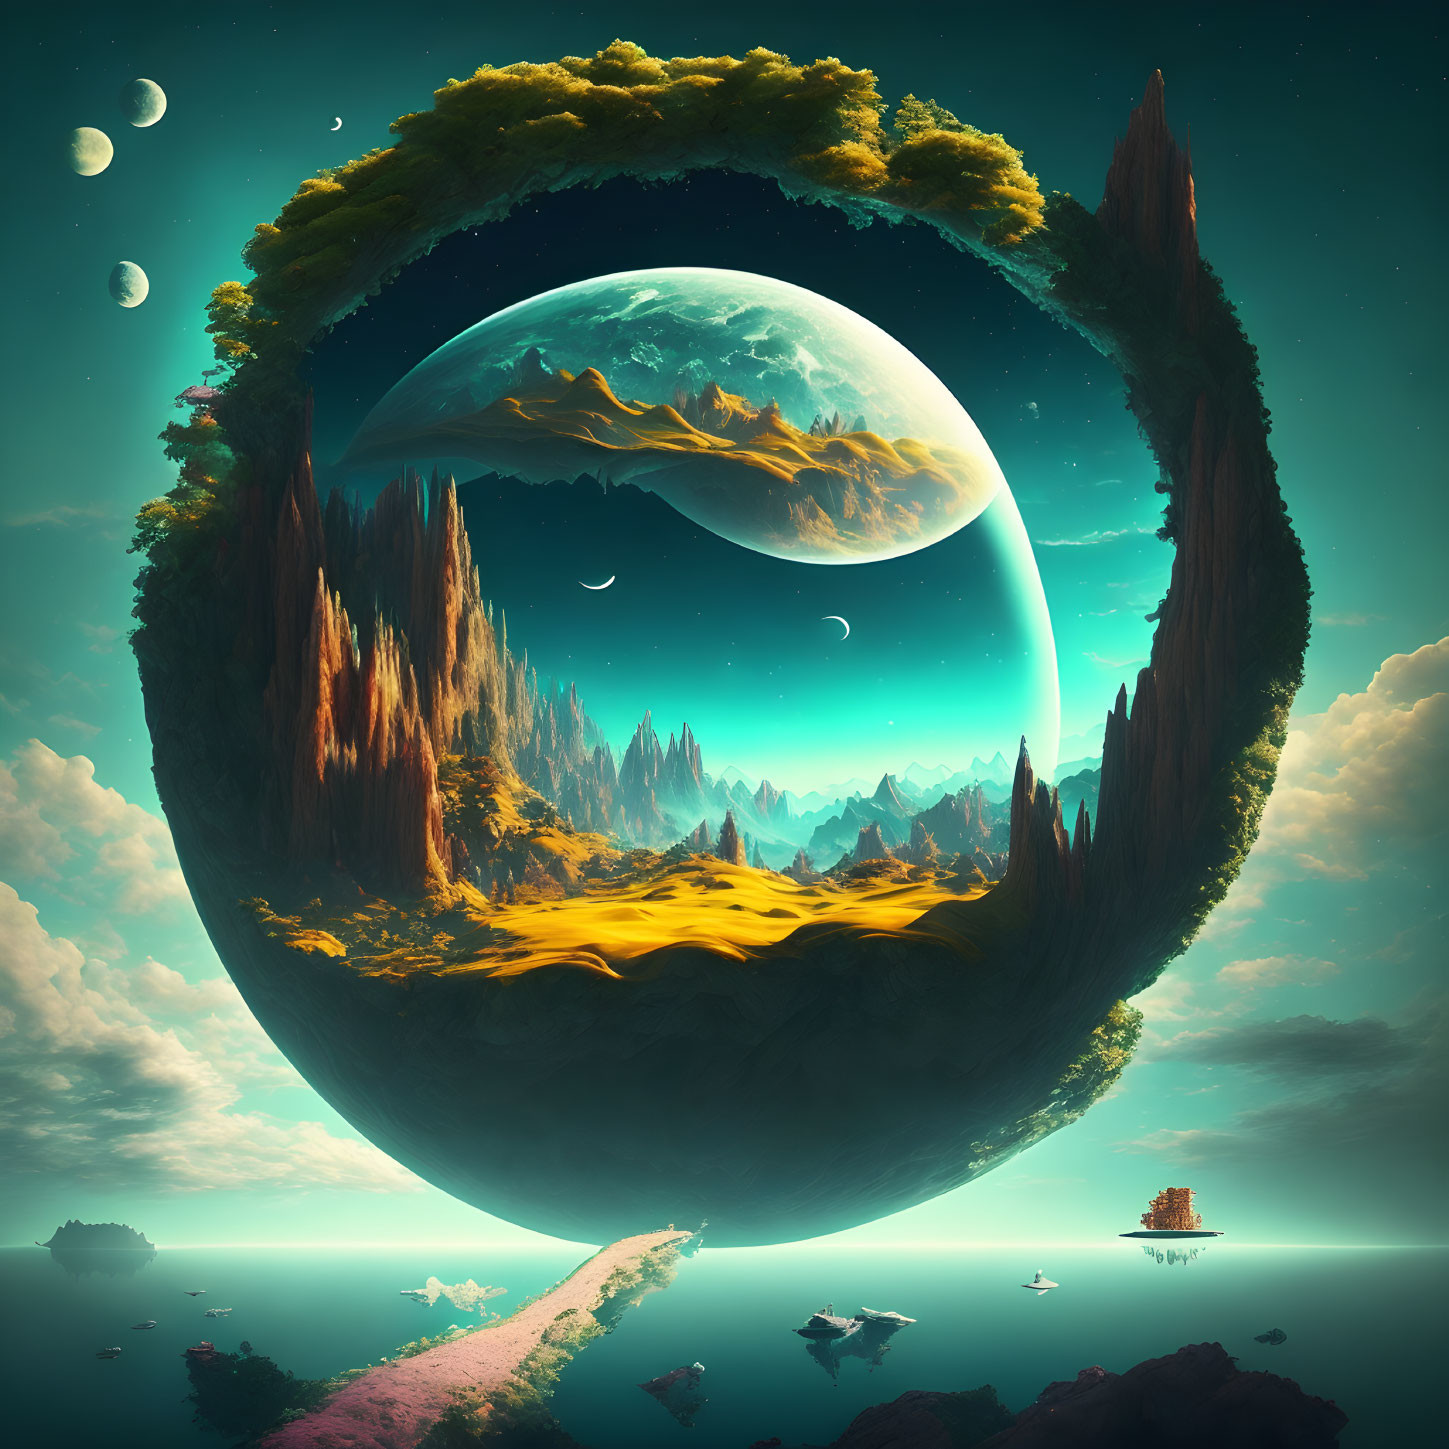 Surreal landscape with ring-shaped landmass, mountains, forest, and cosmic sky over ocean